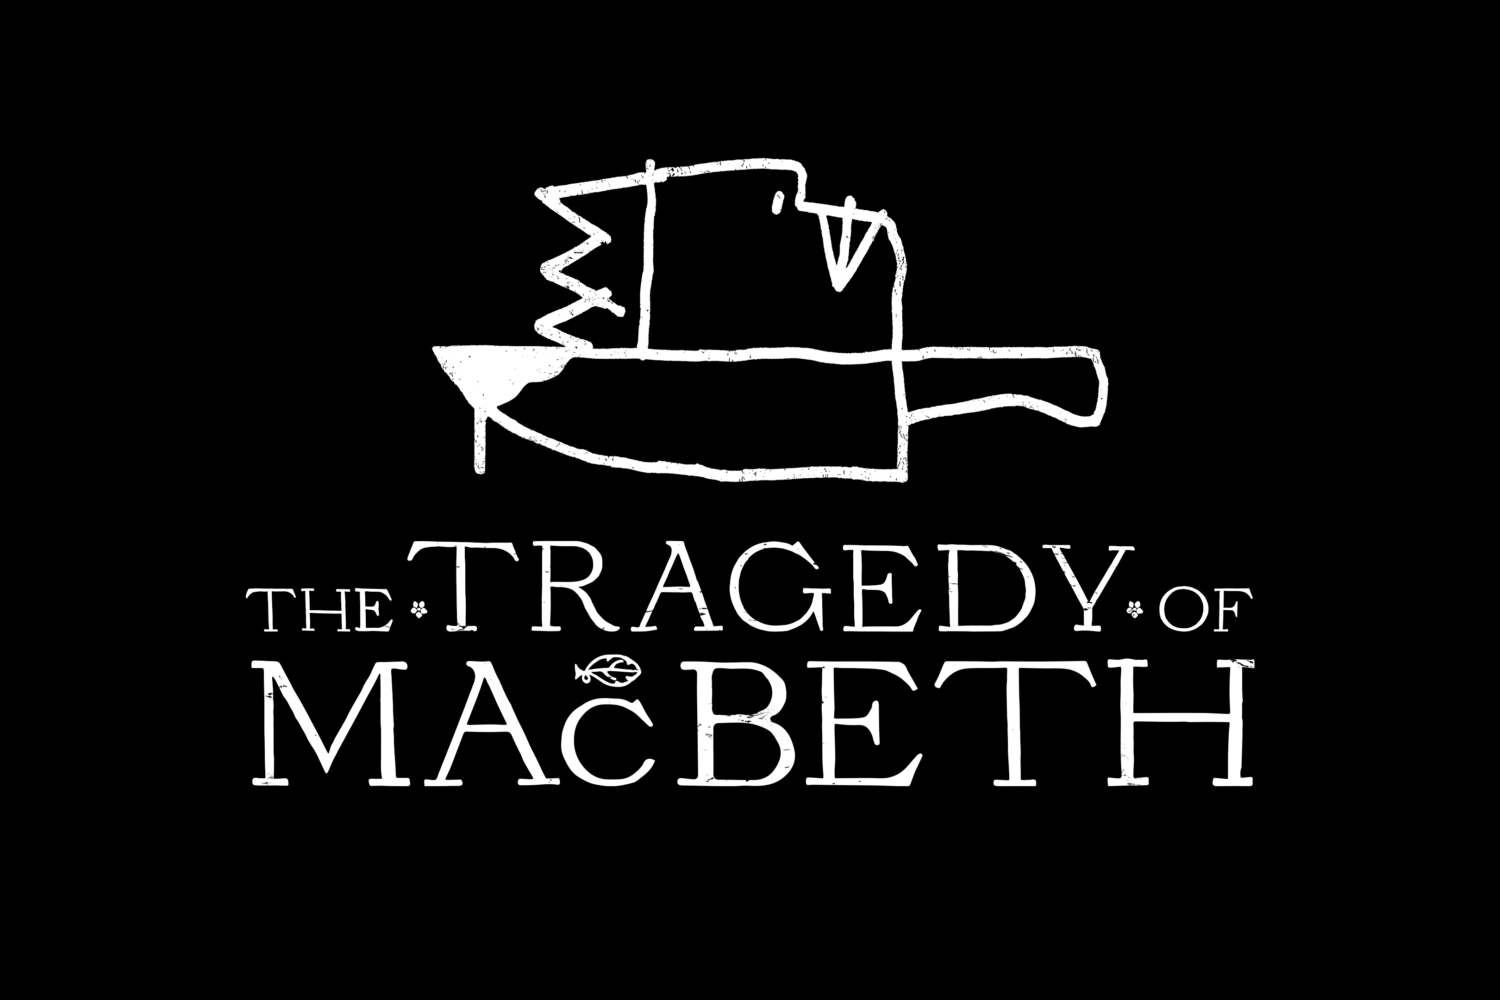 Apple TV+ poster artwork for the film “The Tragedy of Macbeth,” a black-and-white adaptation based on the tragedy of the same name by William Shakespeare